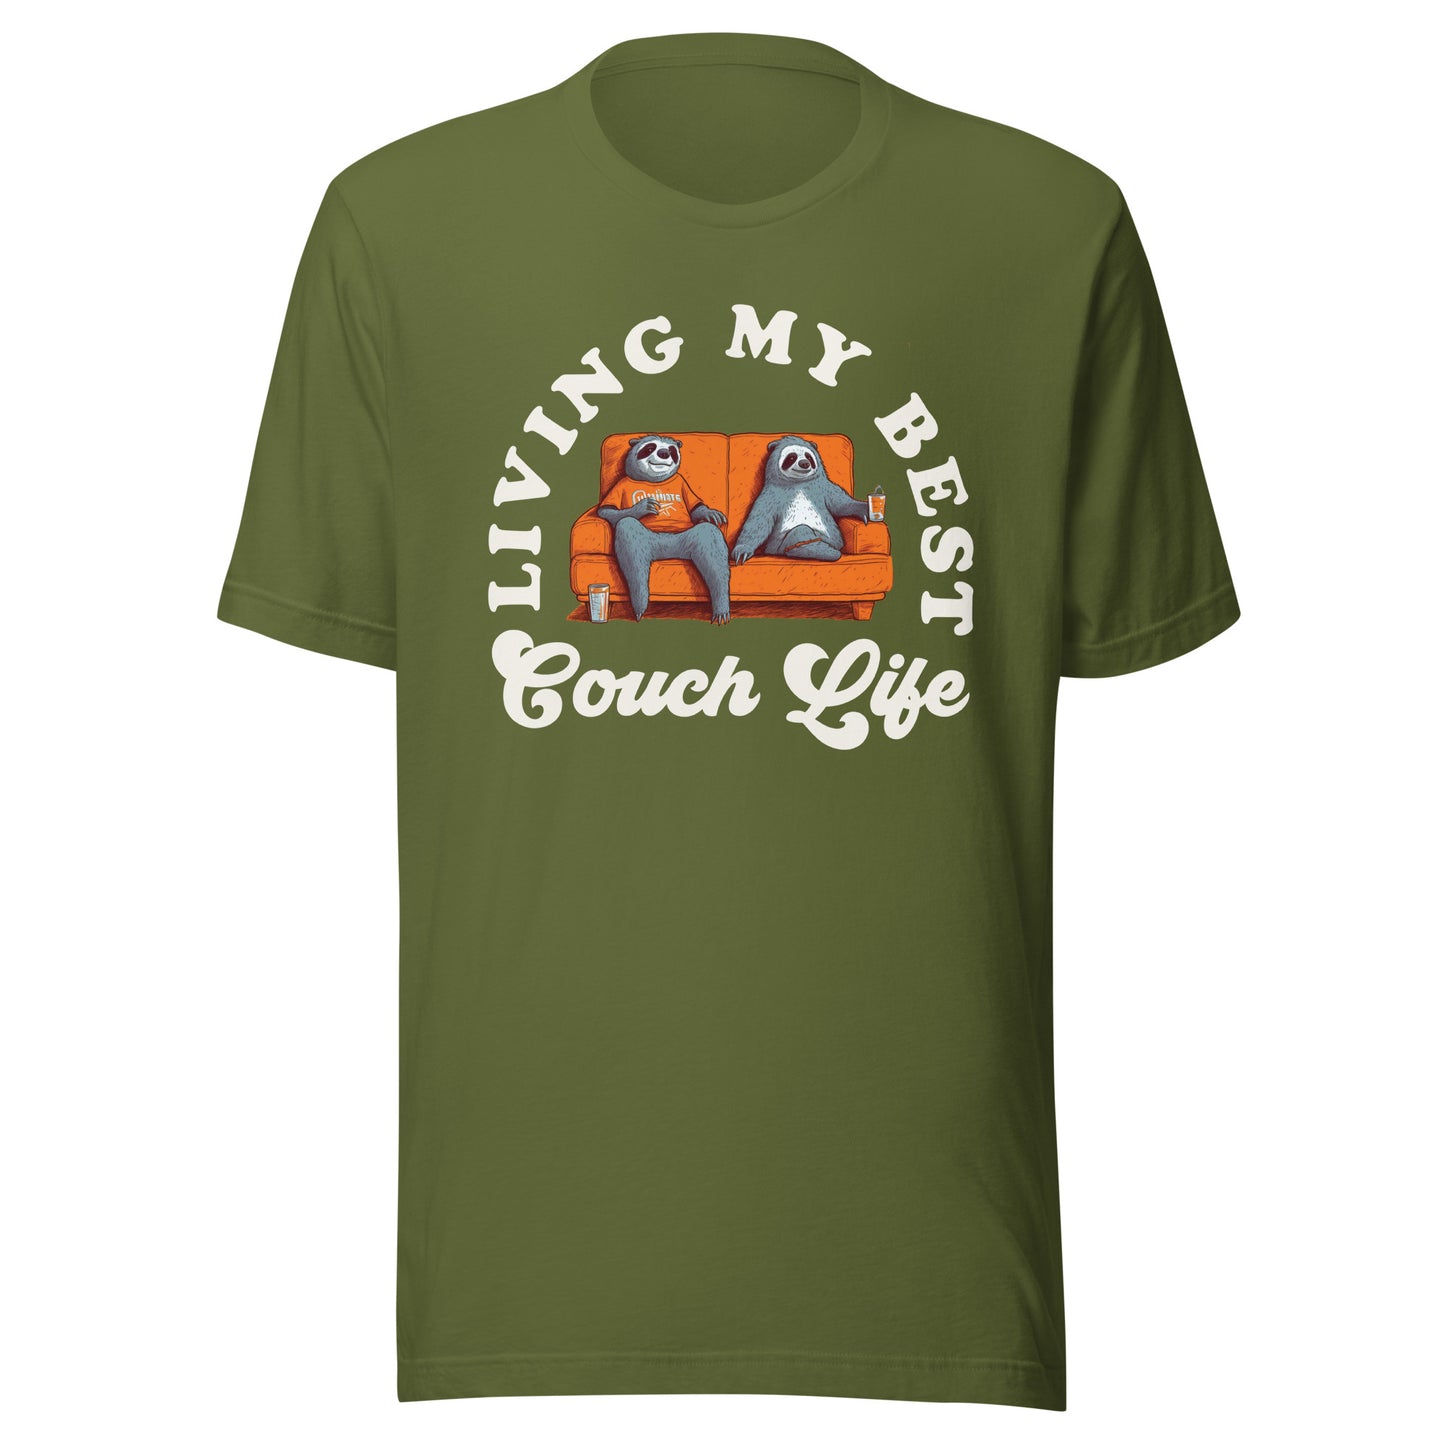 Living My Best Couch Life T-Shirt